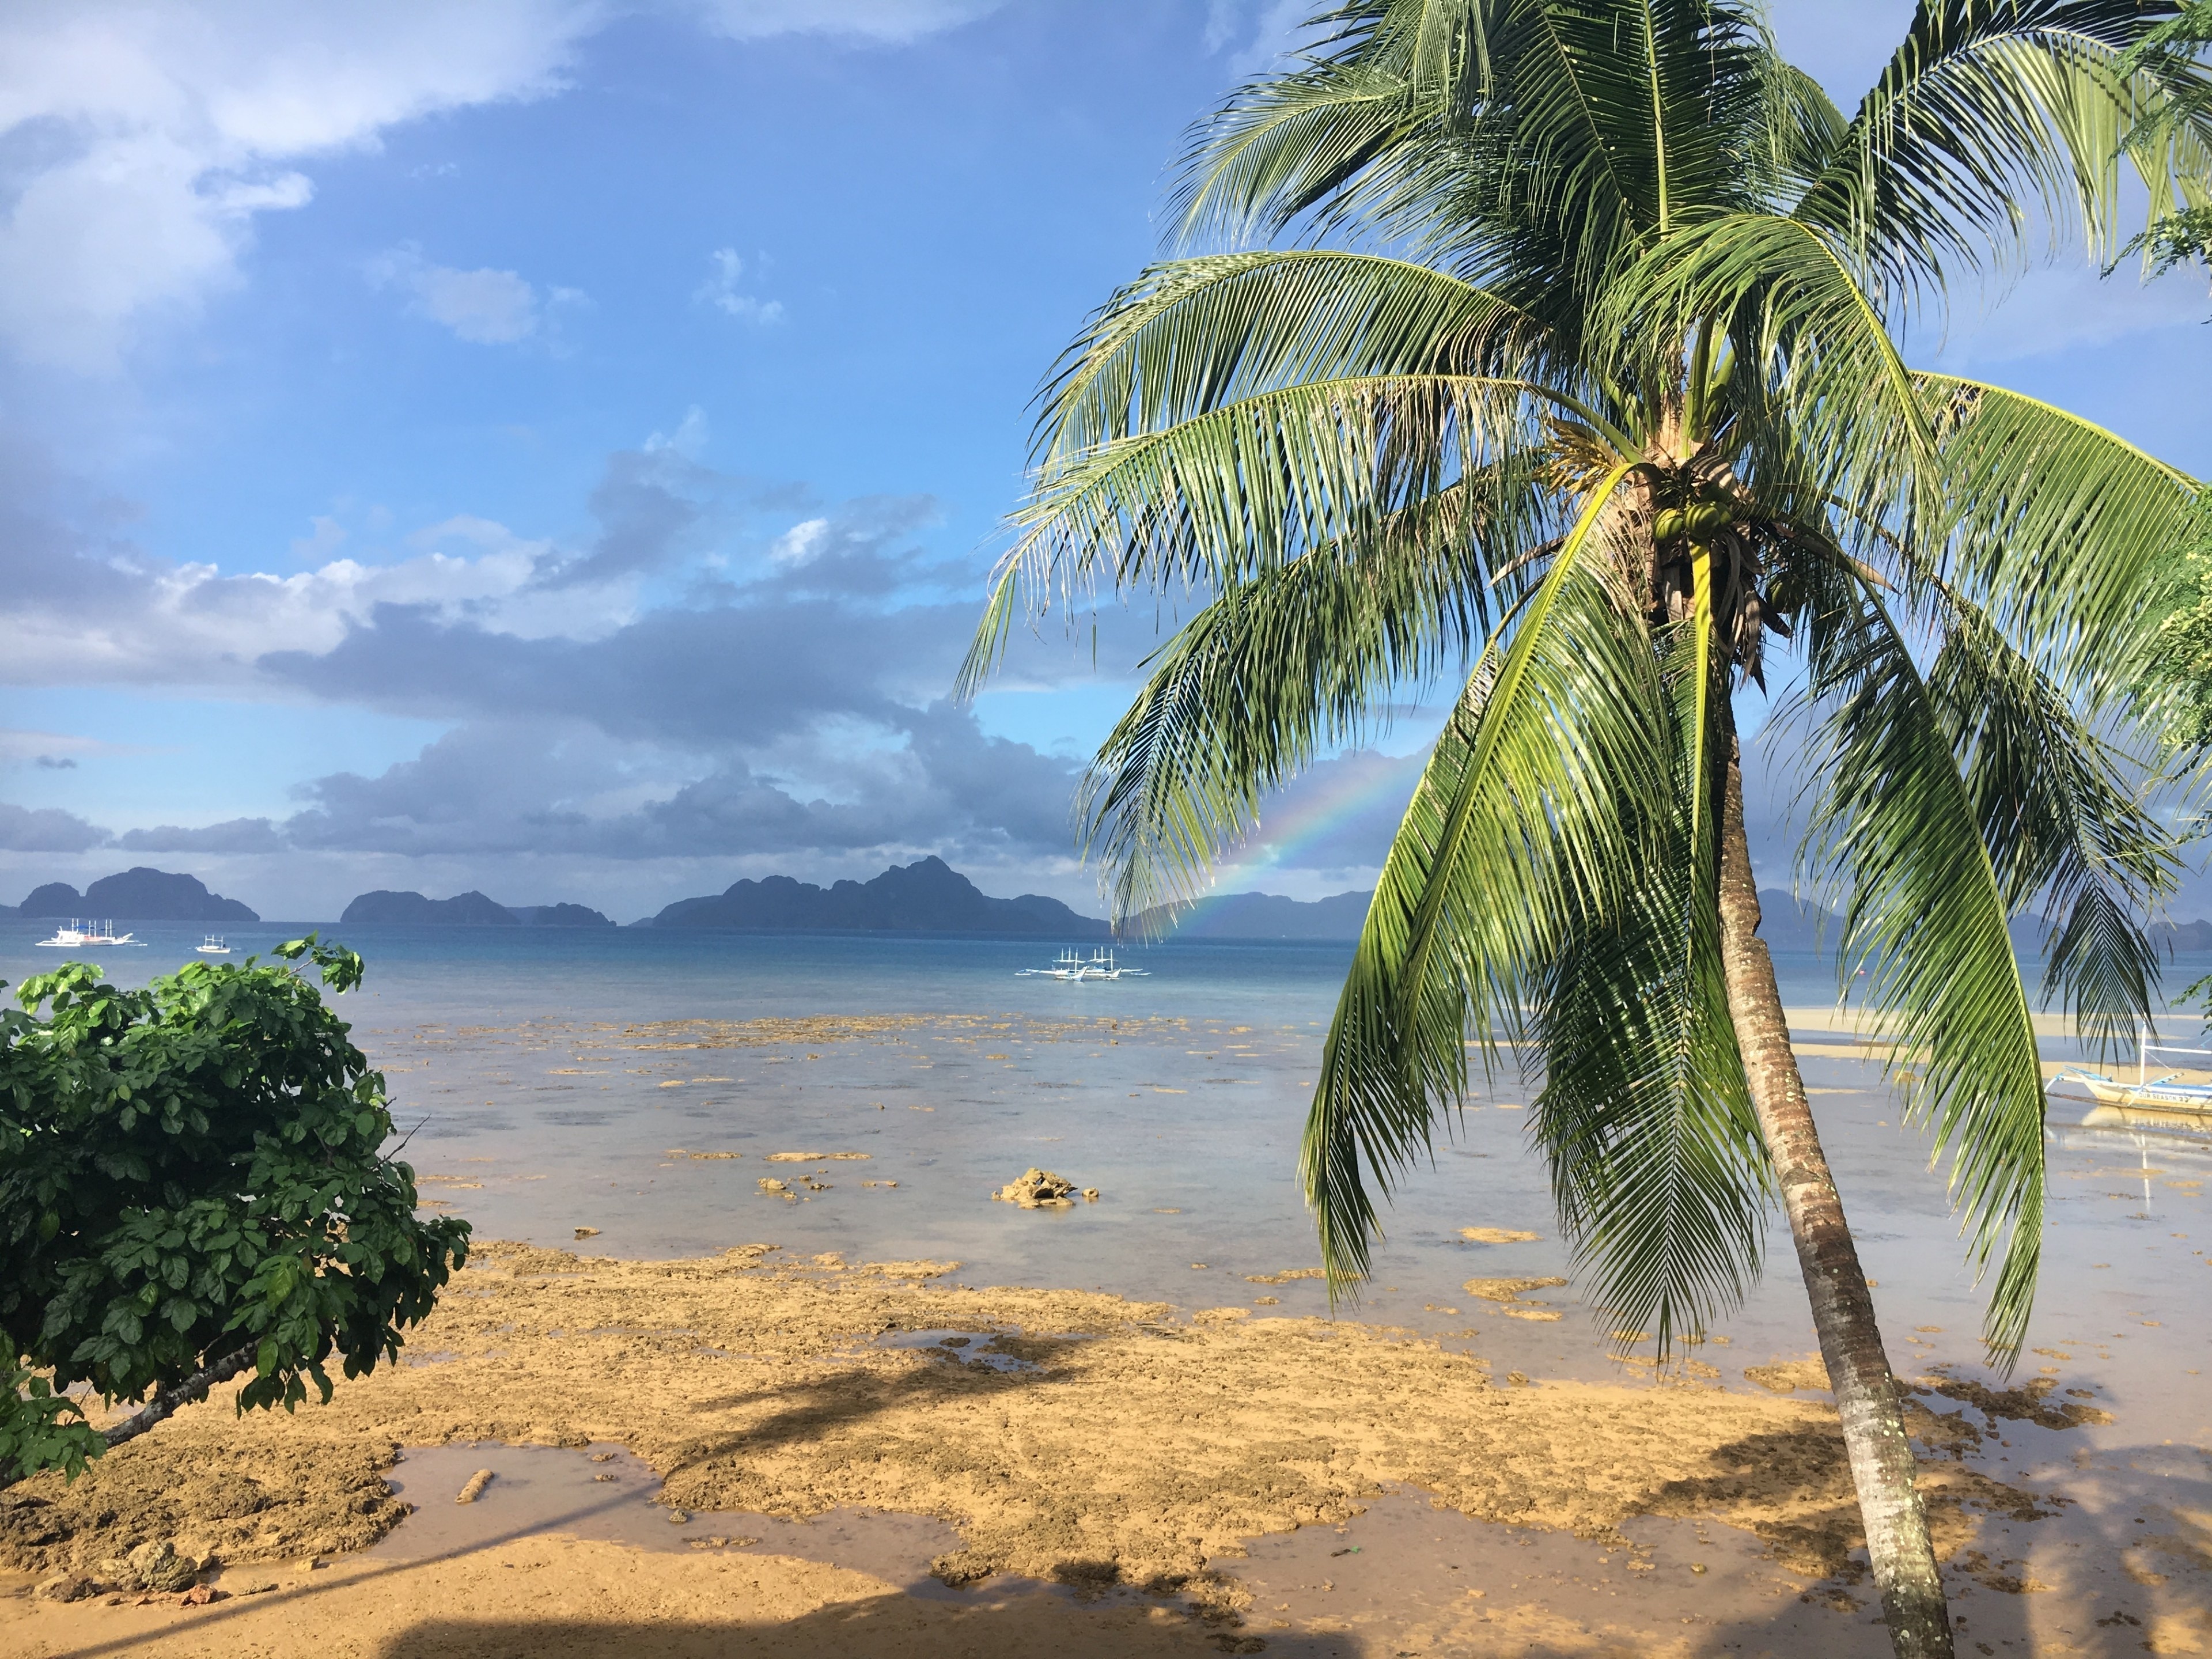 Get up early and catch the unreal lighting over the water in El Nido. #LifeatExepdia #beaches #rainbowsandpalmtrees